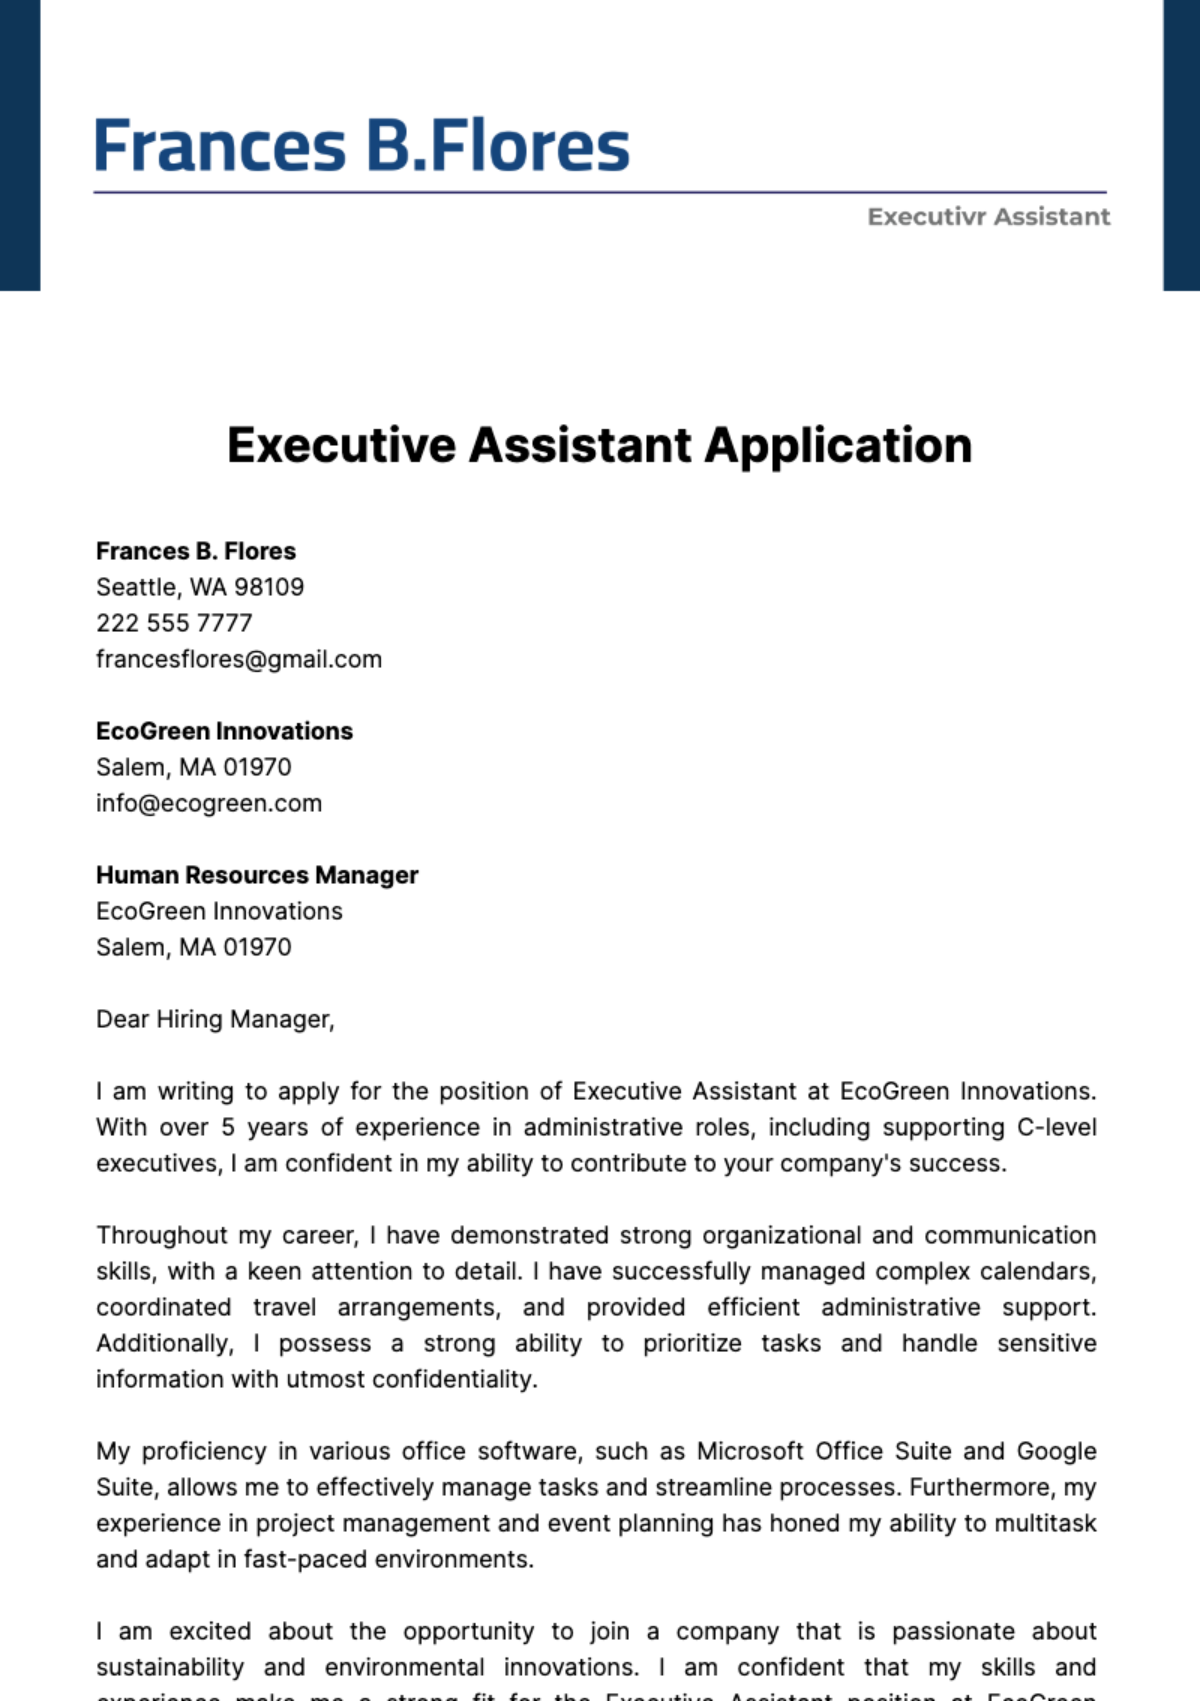 Free Executive Assistant Cover Letter  Template